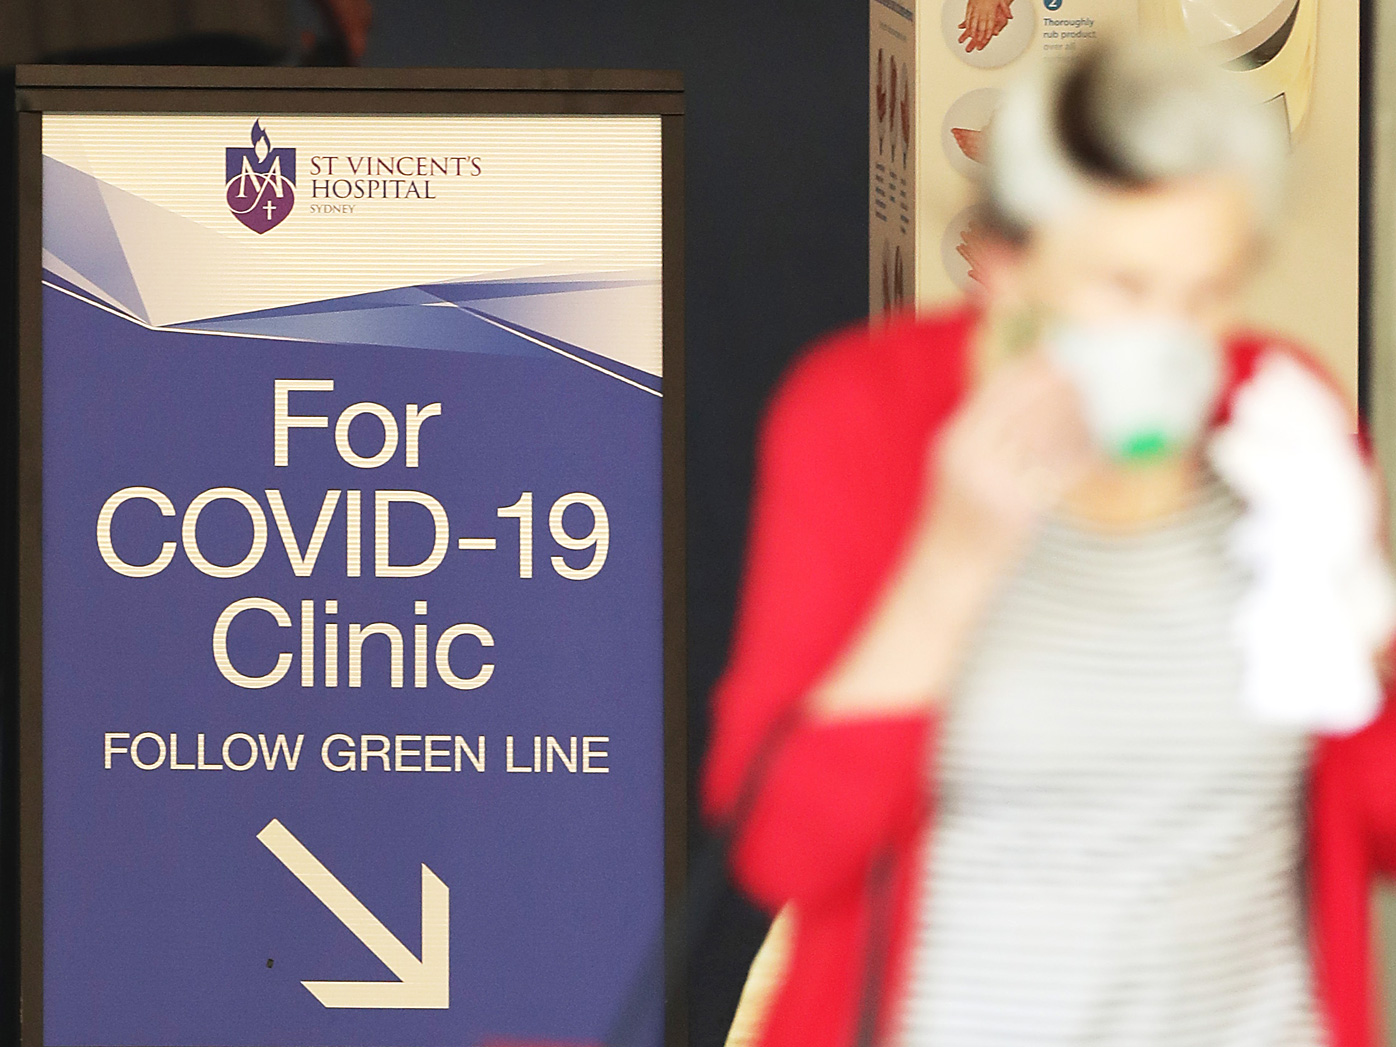 A woman passes a sign for a COVID -19 Clinic as she exits St Vincent's hospital in Sydney, Australia.